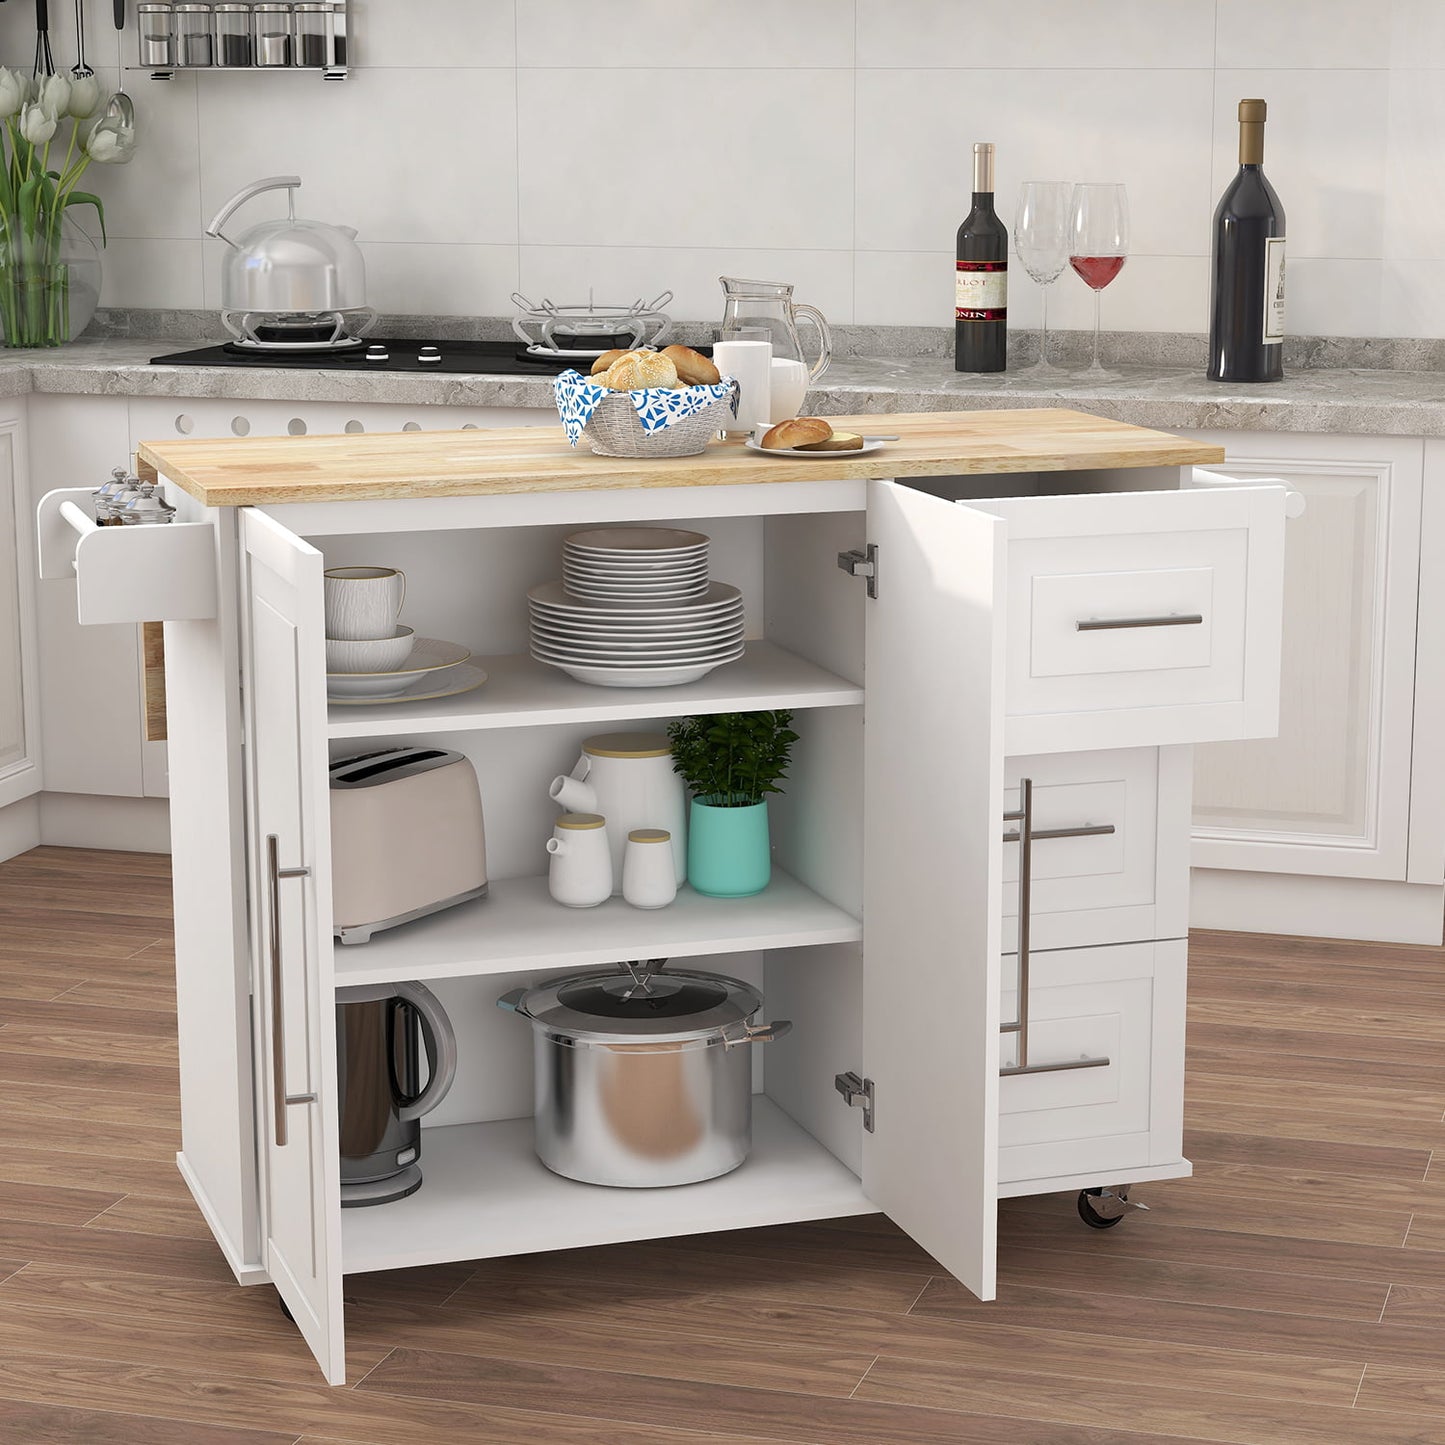 Rolling Kitchen Island with Storage, BTMWAY Kitchen Island Cart on Wheels with Extensible Table Top, Portable Kitchen Coffee Cart, Rolling Kitchen Trolley Utility Cart Microwave Cabinets, A5799